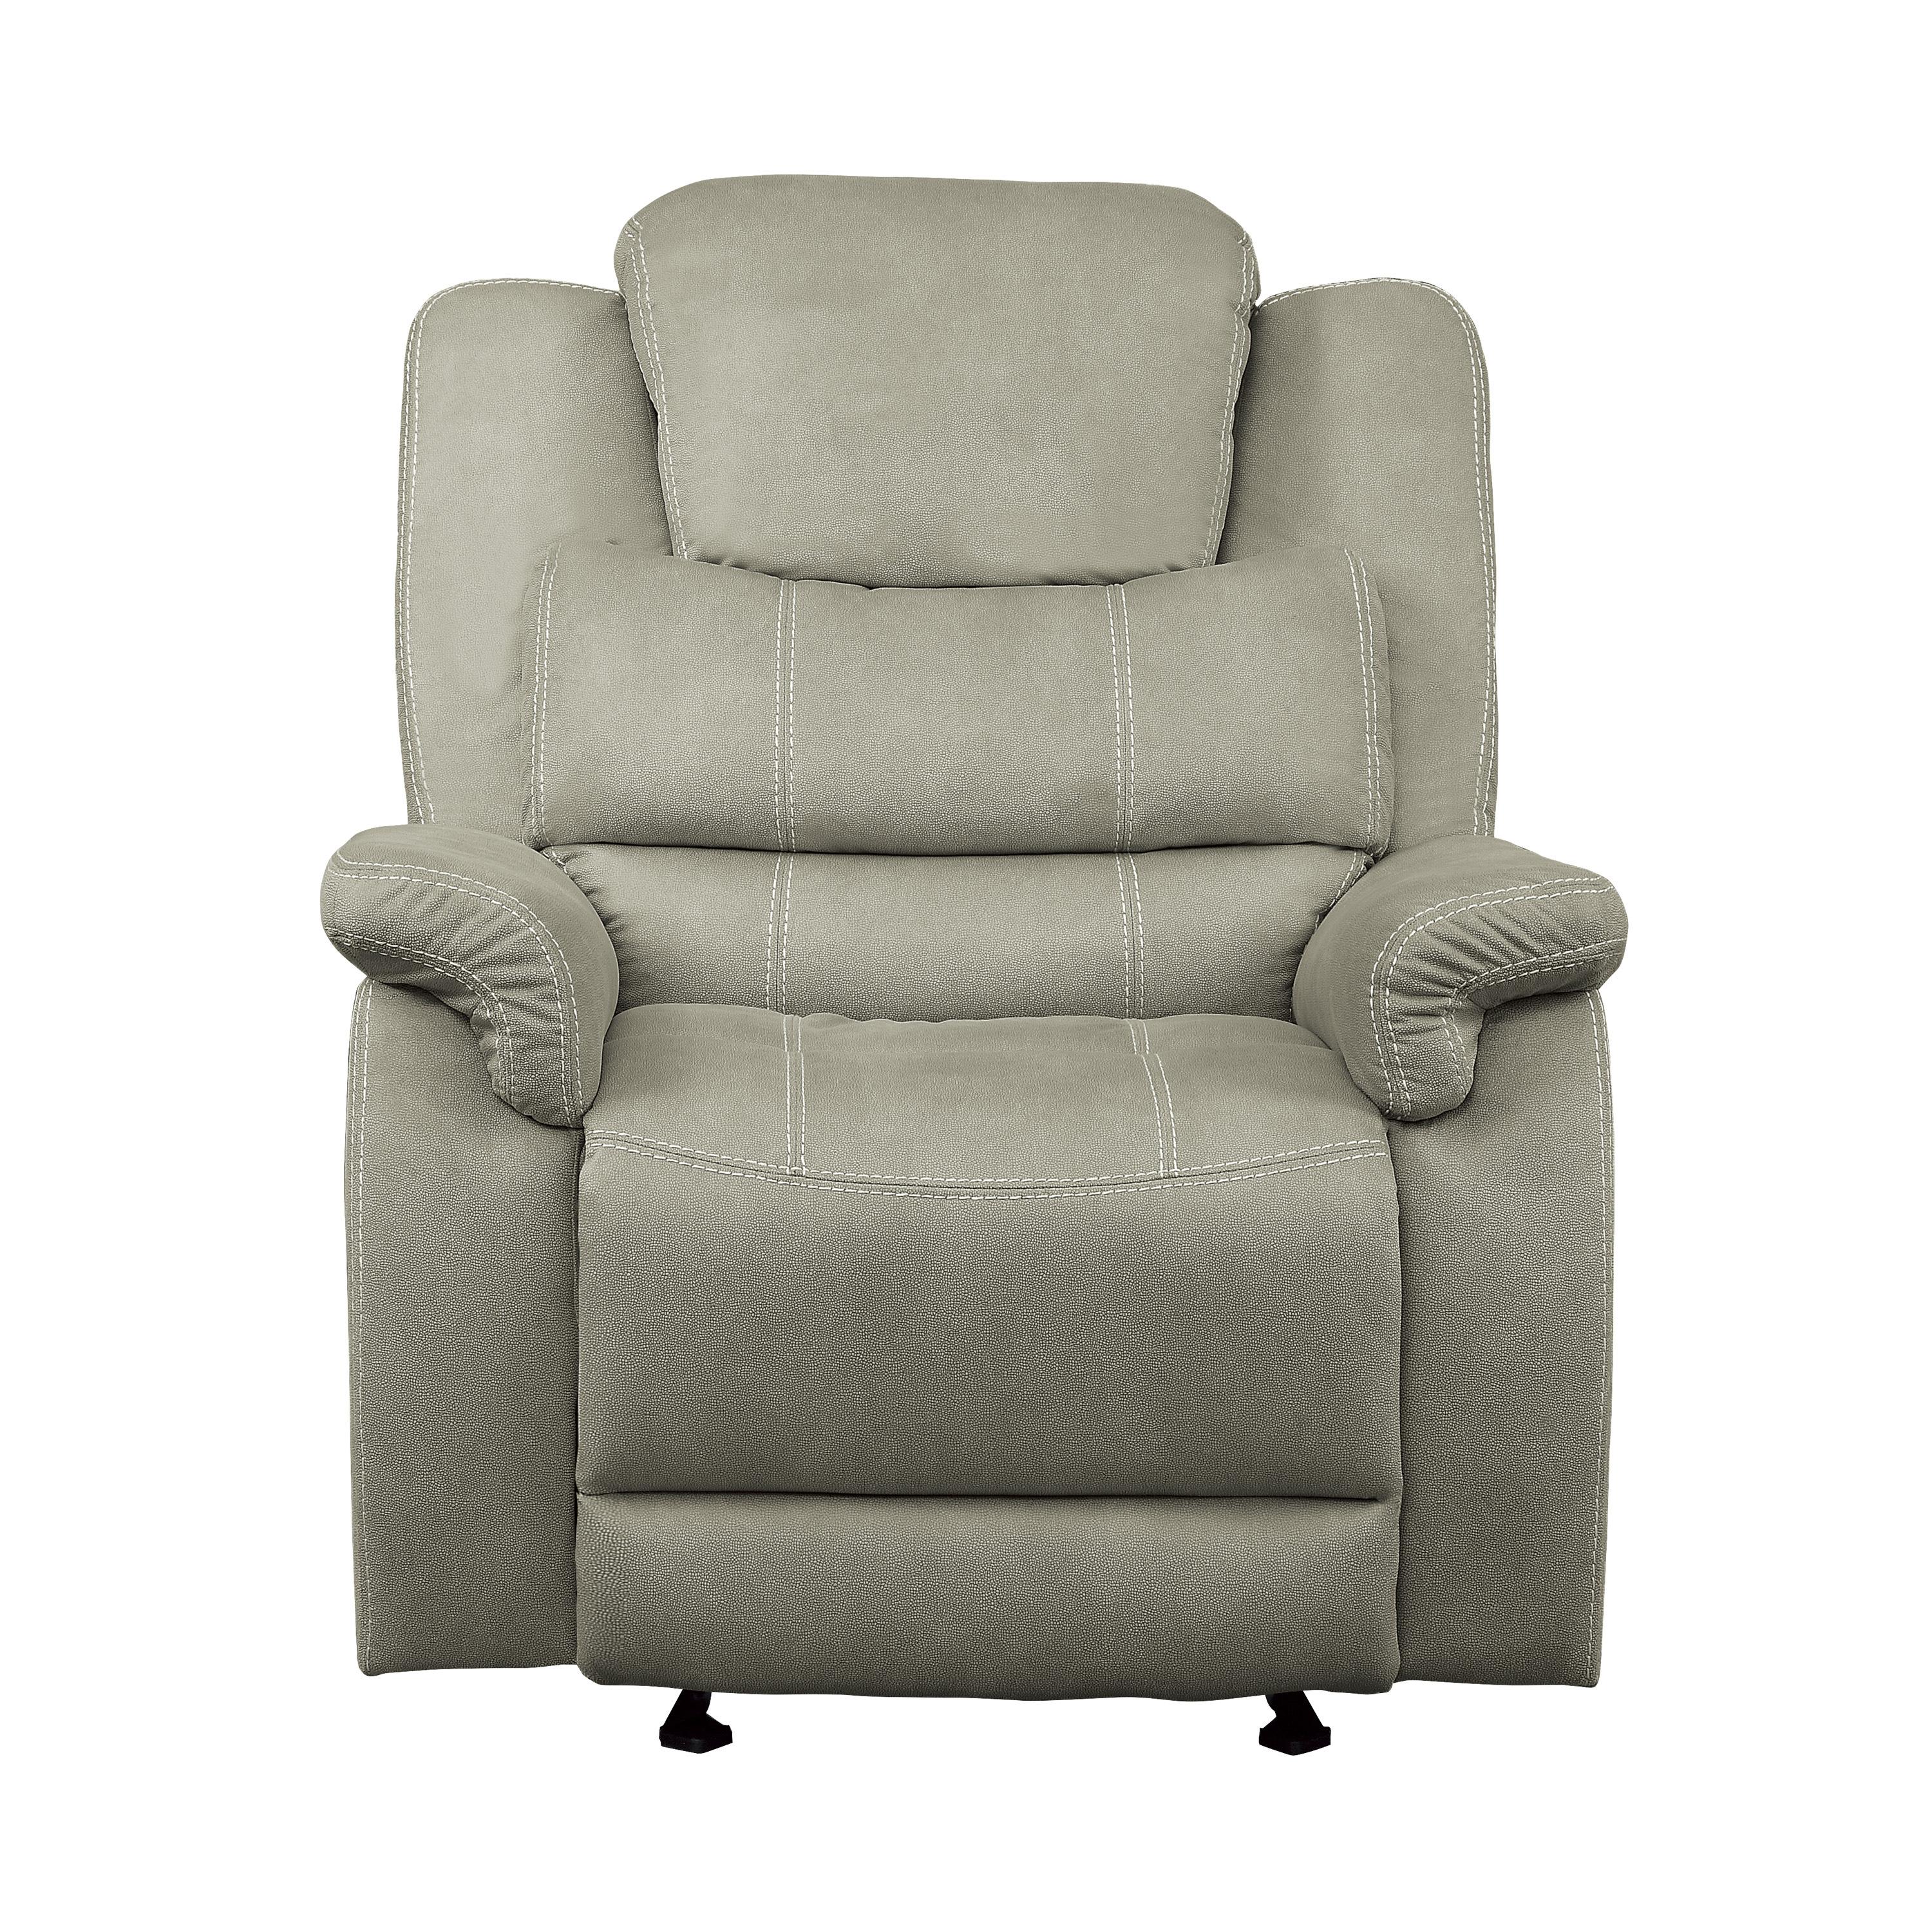 Transitional Reclining Chair 9848GY-1 Shola 9848GY-1 in Gray Microfiber